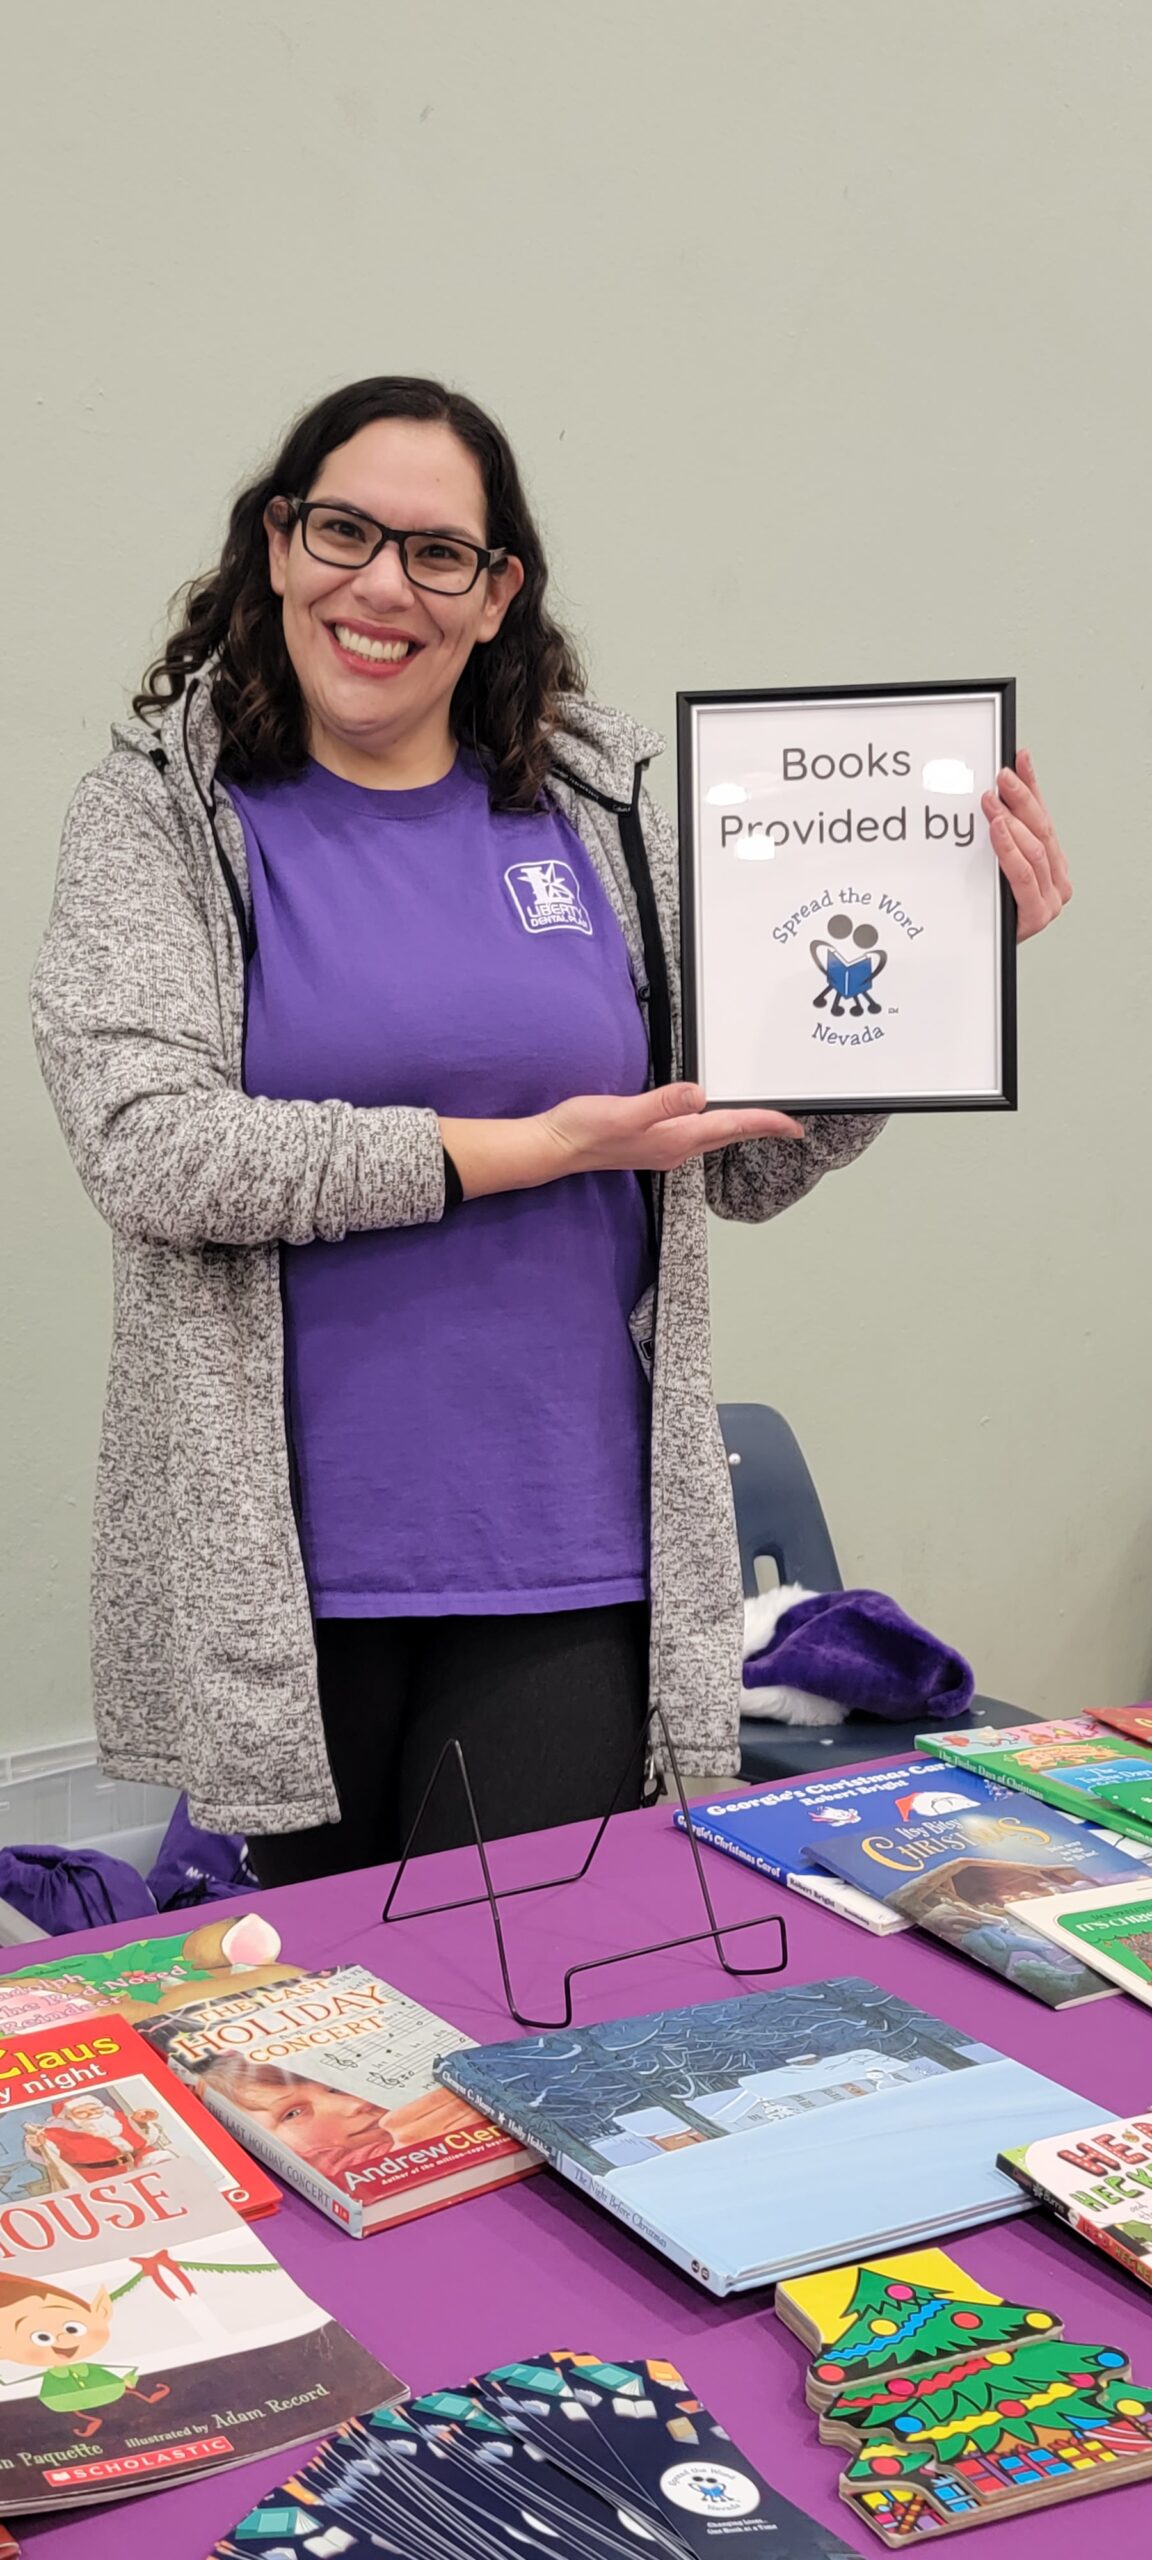 A woman holding a purple t shirt and a book on a table.